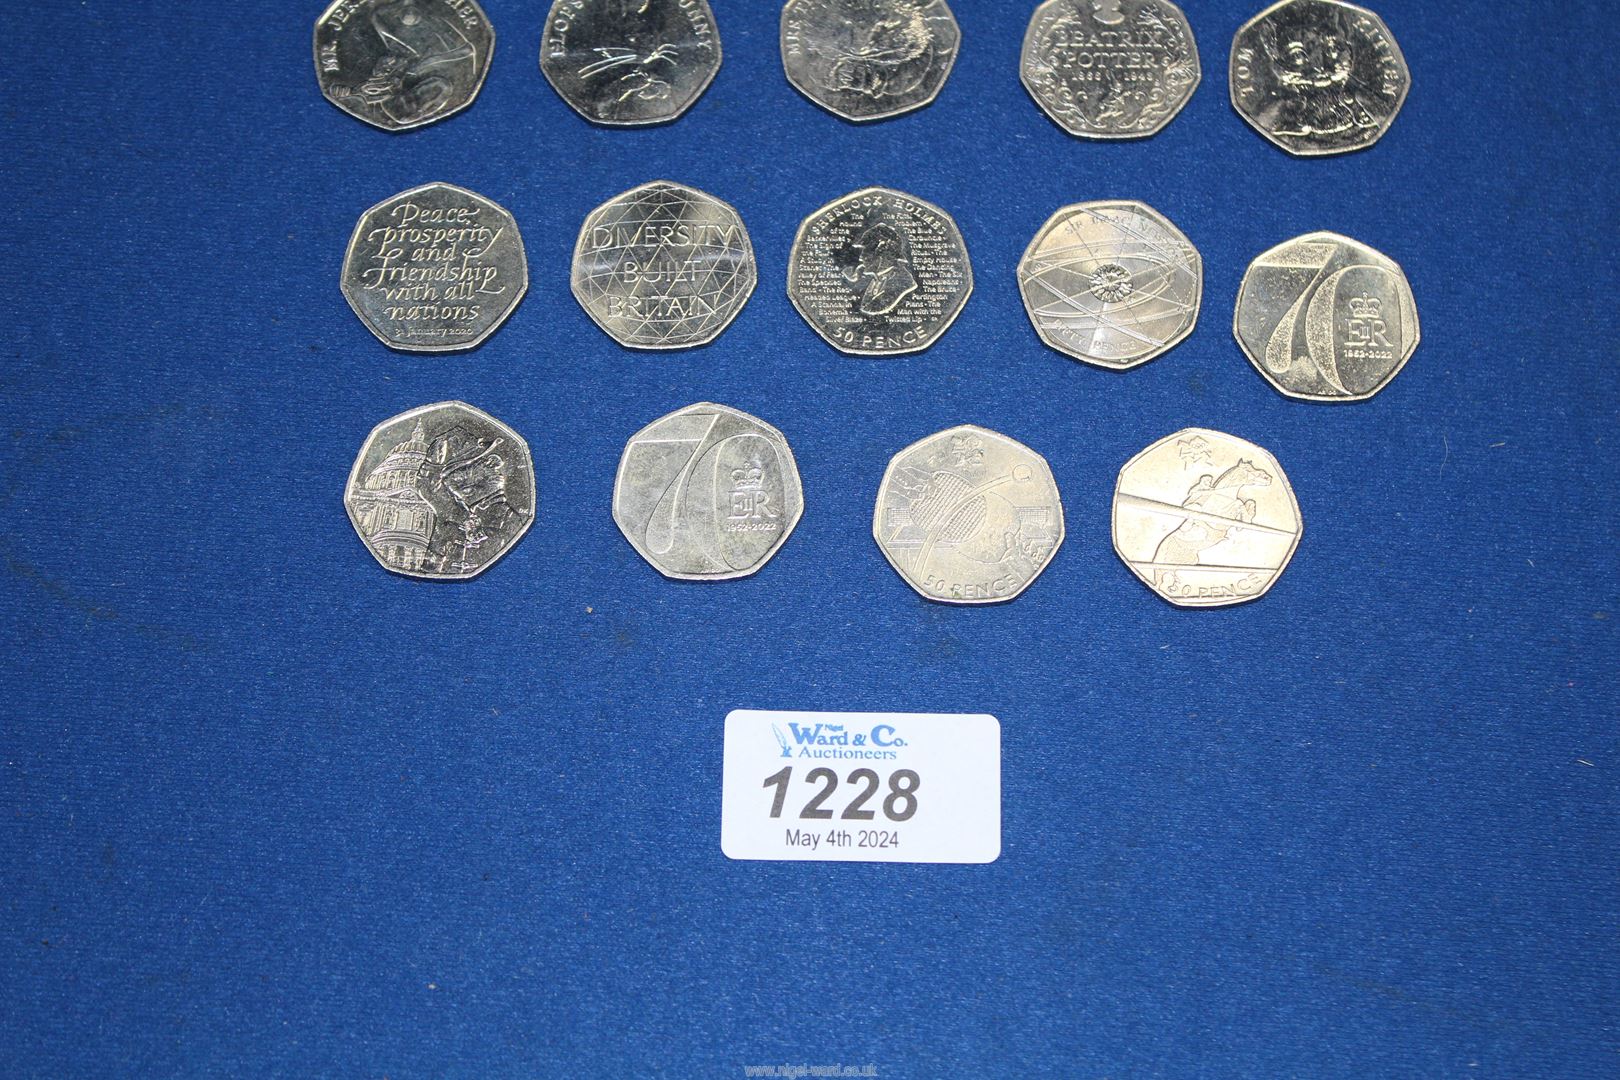 A quantity of collectible 50p coins including; Beatrix Potter, Olympics, Paddington, Isaac Newton, - Image 3 of 4